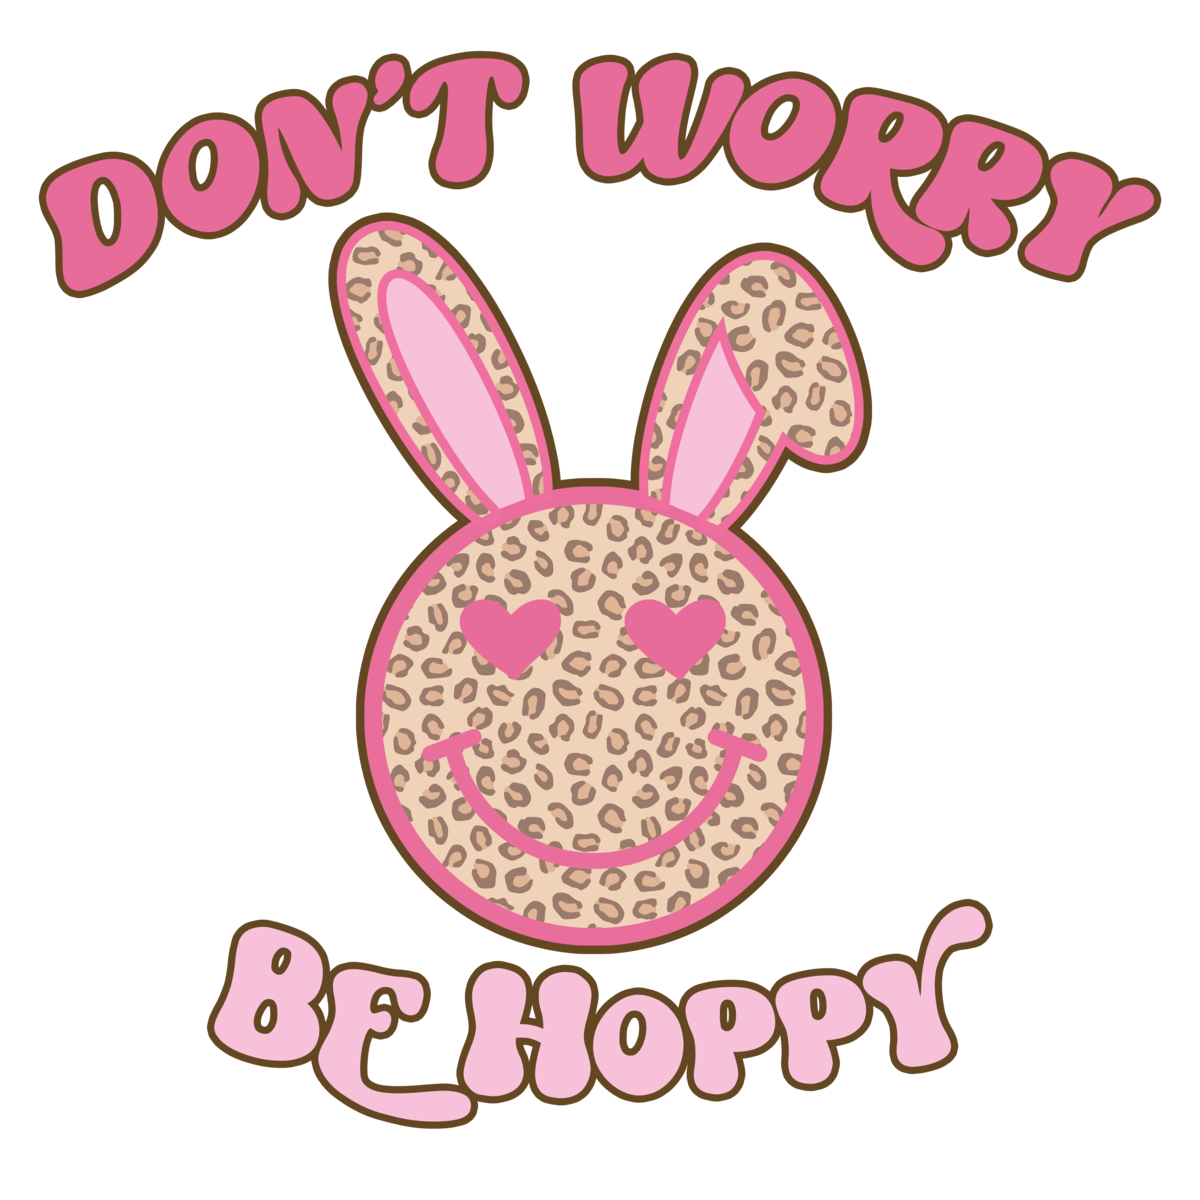 Don't worry be 'happy'